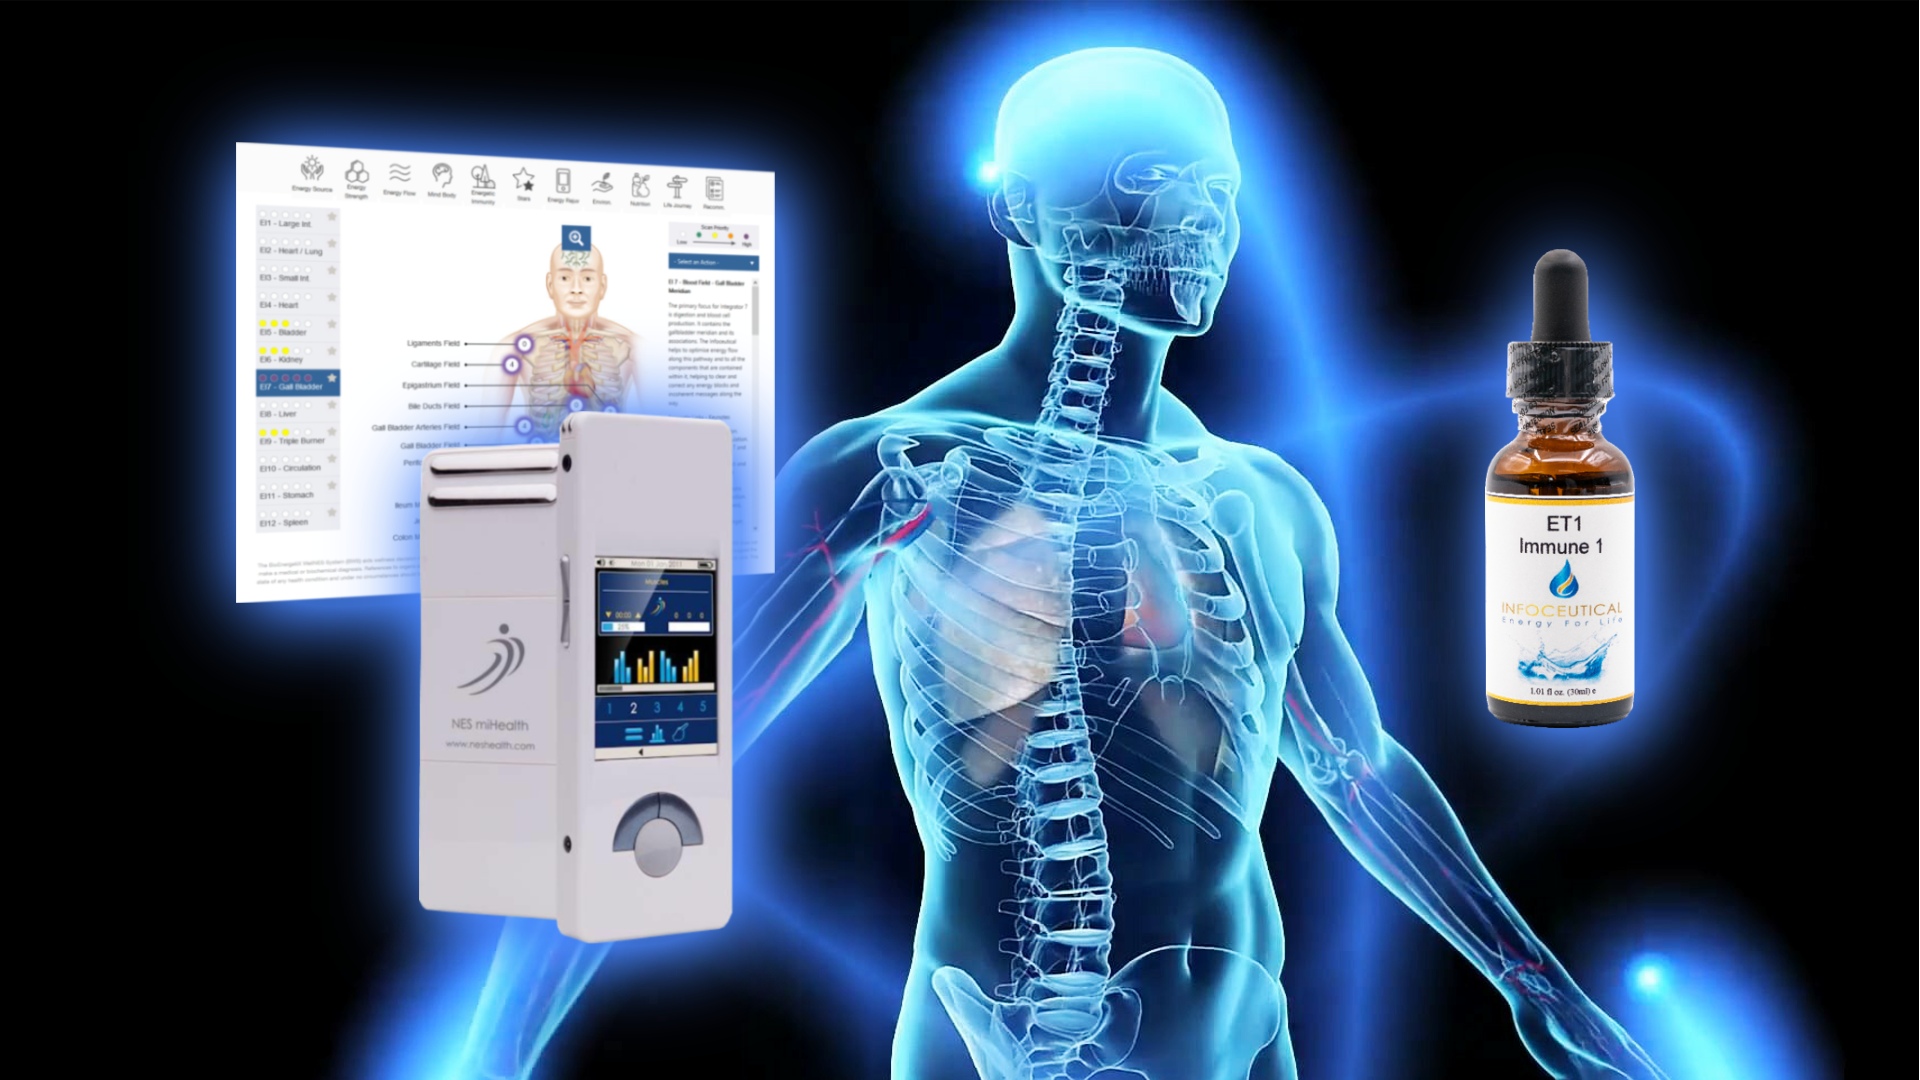 Restore your immunity and wellbeing now - with NES body-field scan and therapy.